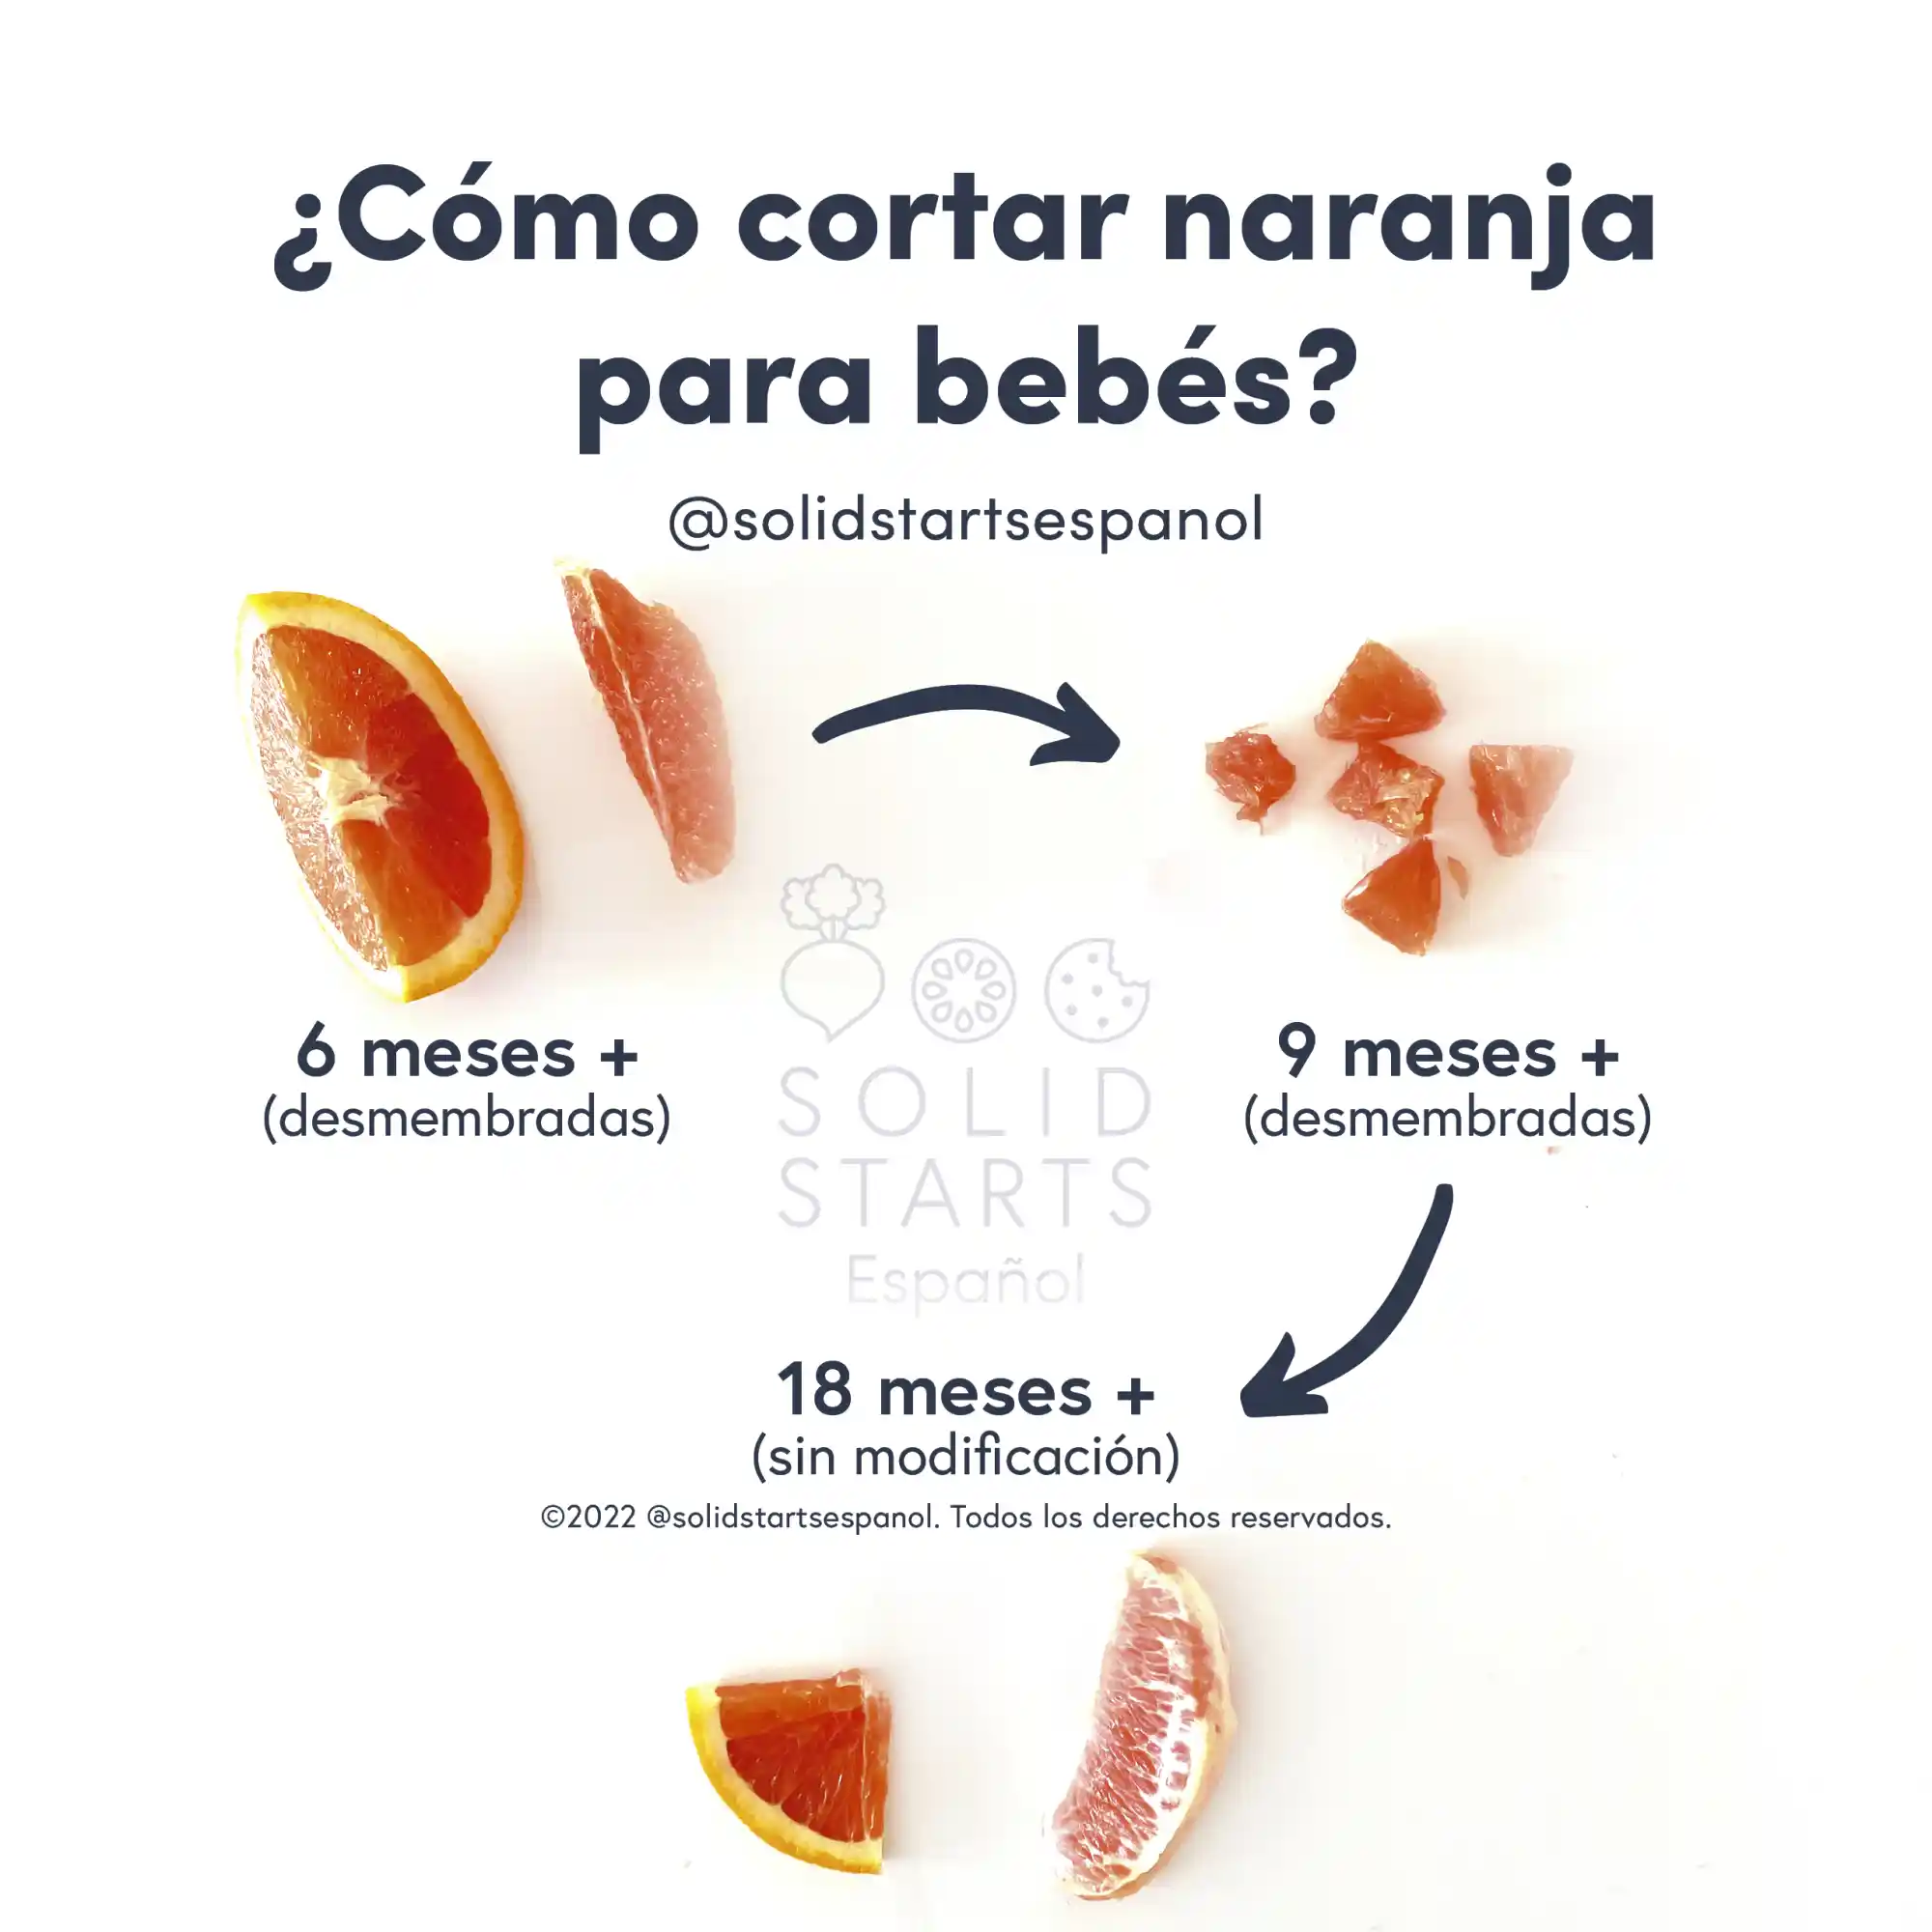 an infographic with the header "how to cut oranges for babies": washed wedges with the peel on and seeds and membrane removed for 6 months+, bite-sized pieces with membrane removed for 9 months+, slices with peel on or with membrane intact for 18 months+